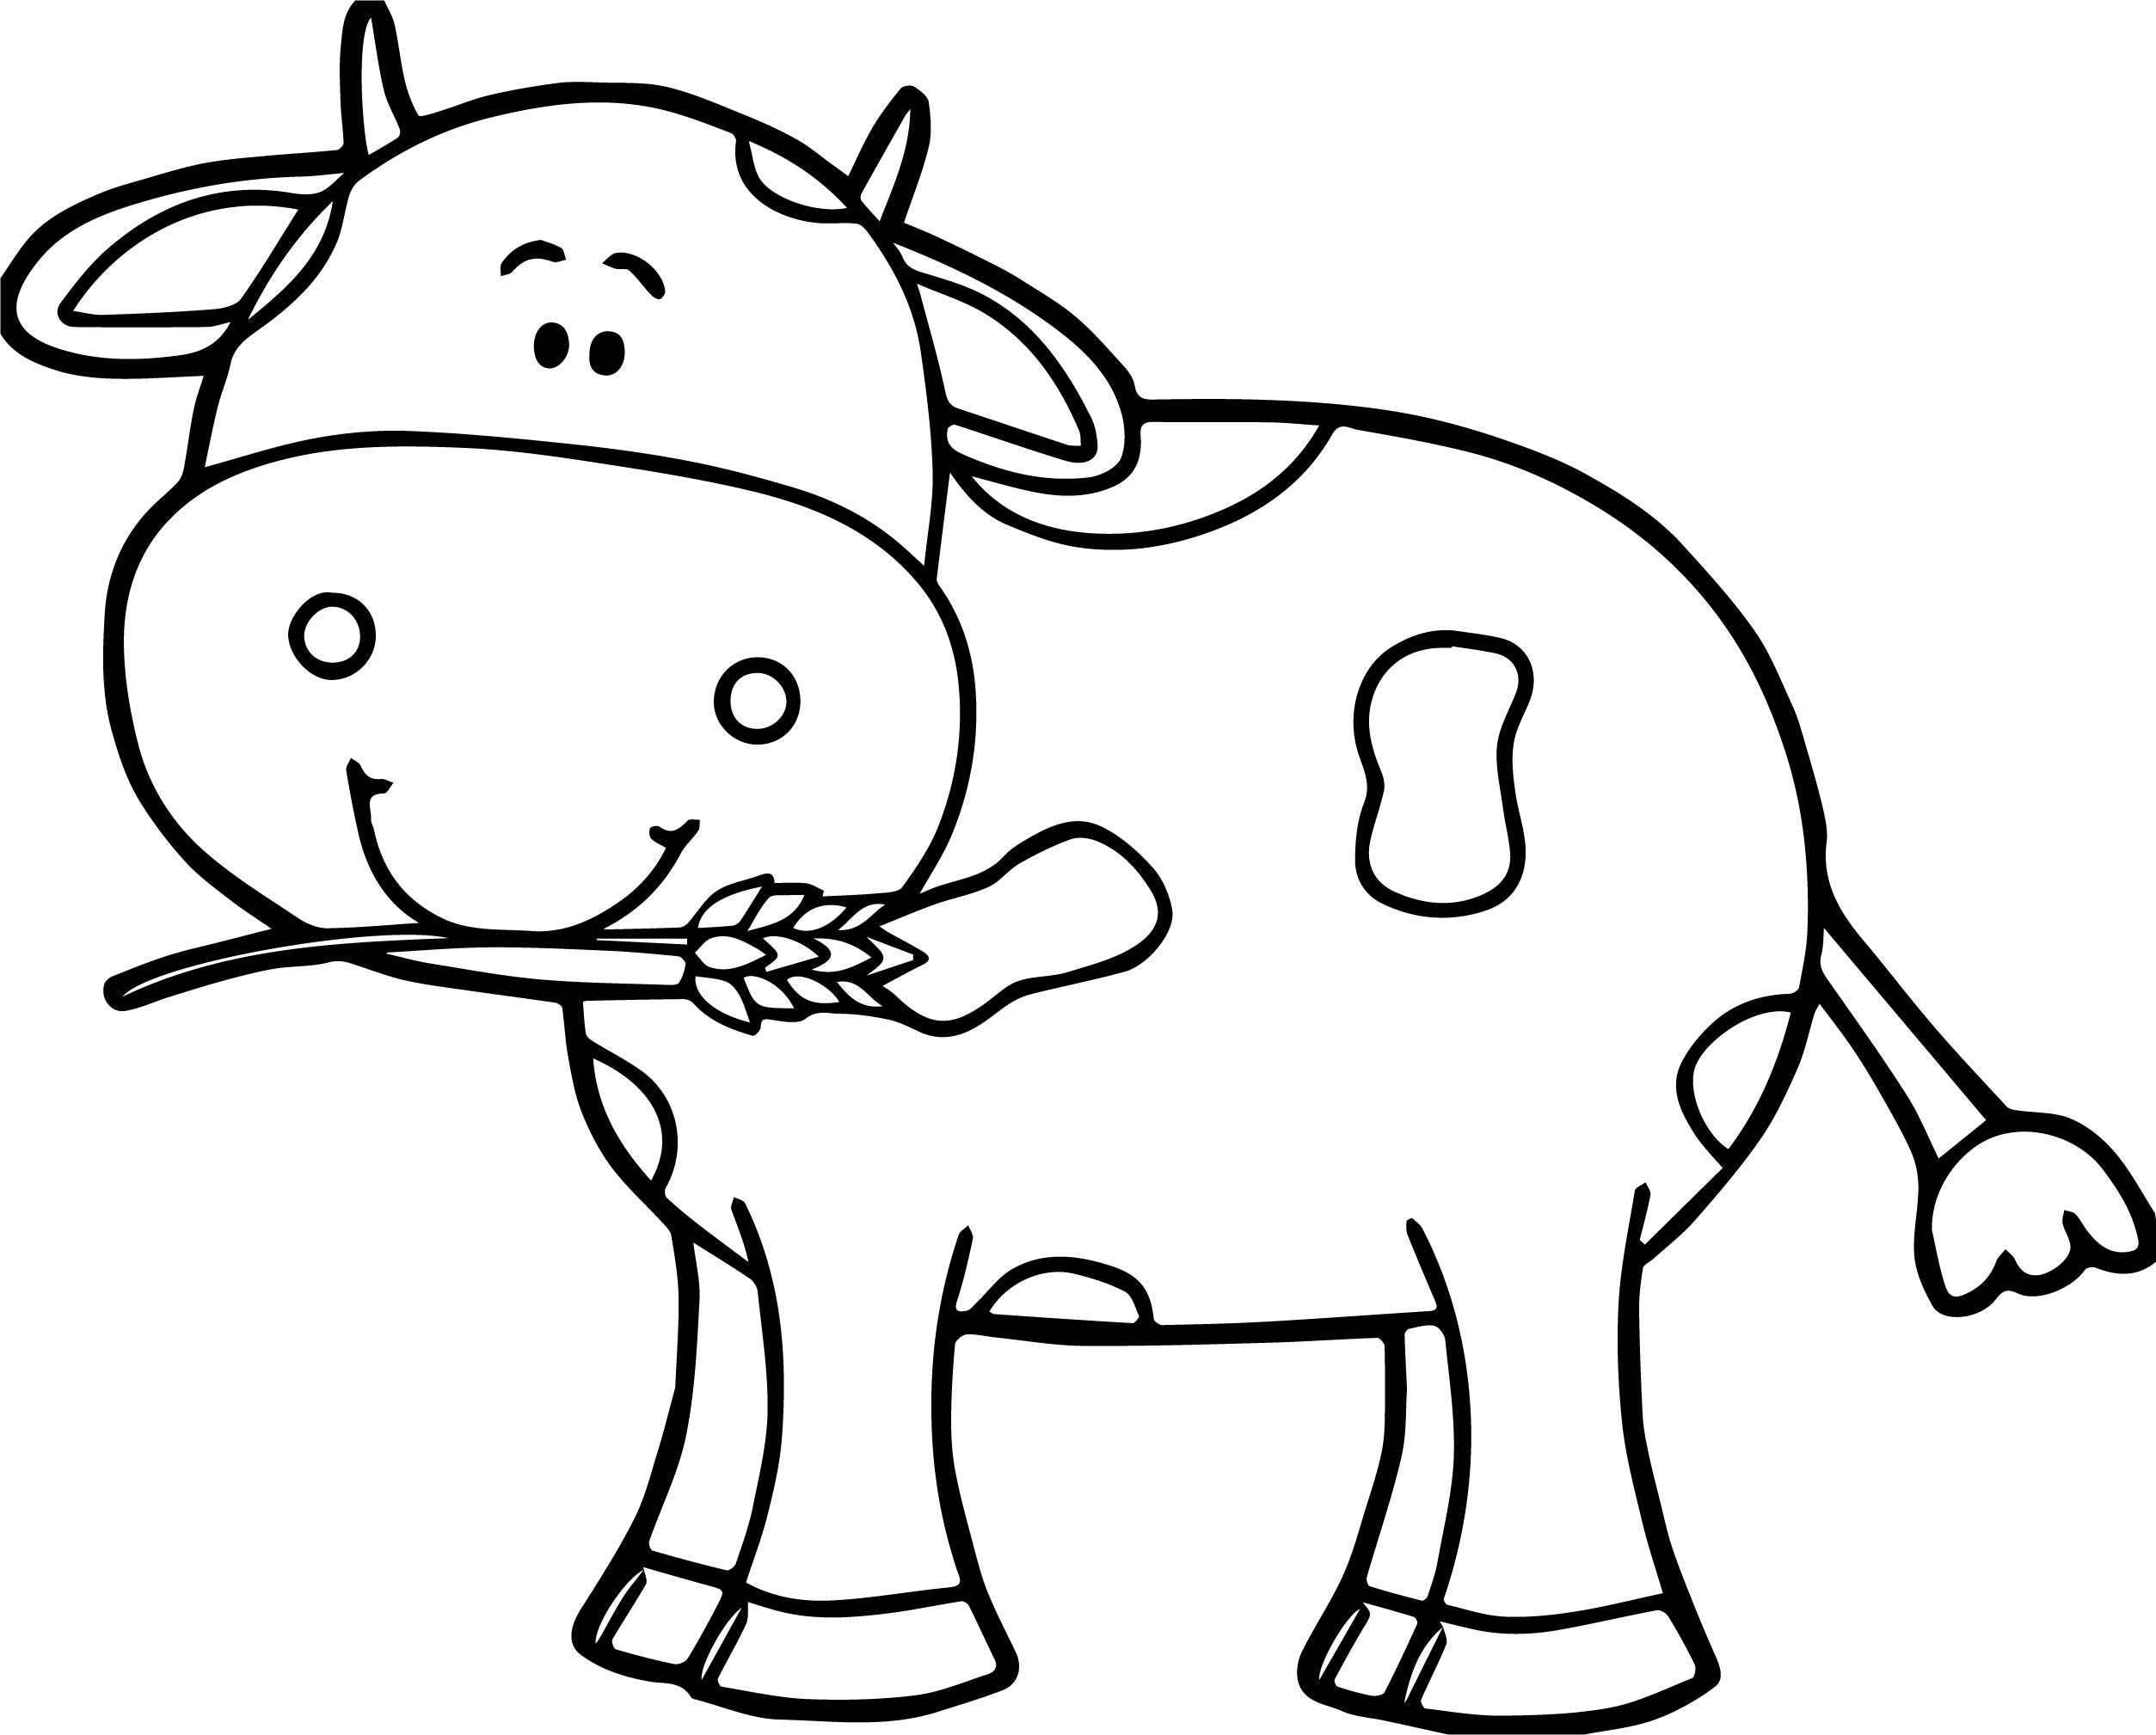 Cow Head Coloring Page at GetColorings.com | Free printable colorings ...